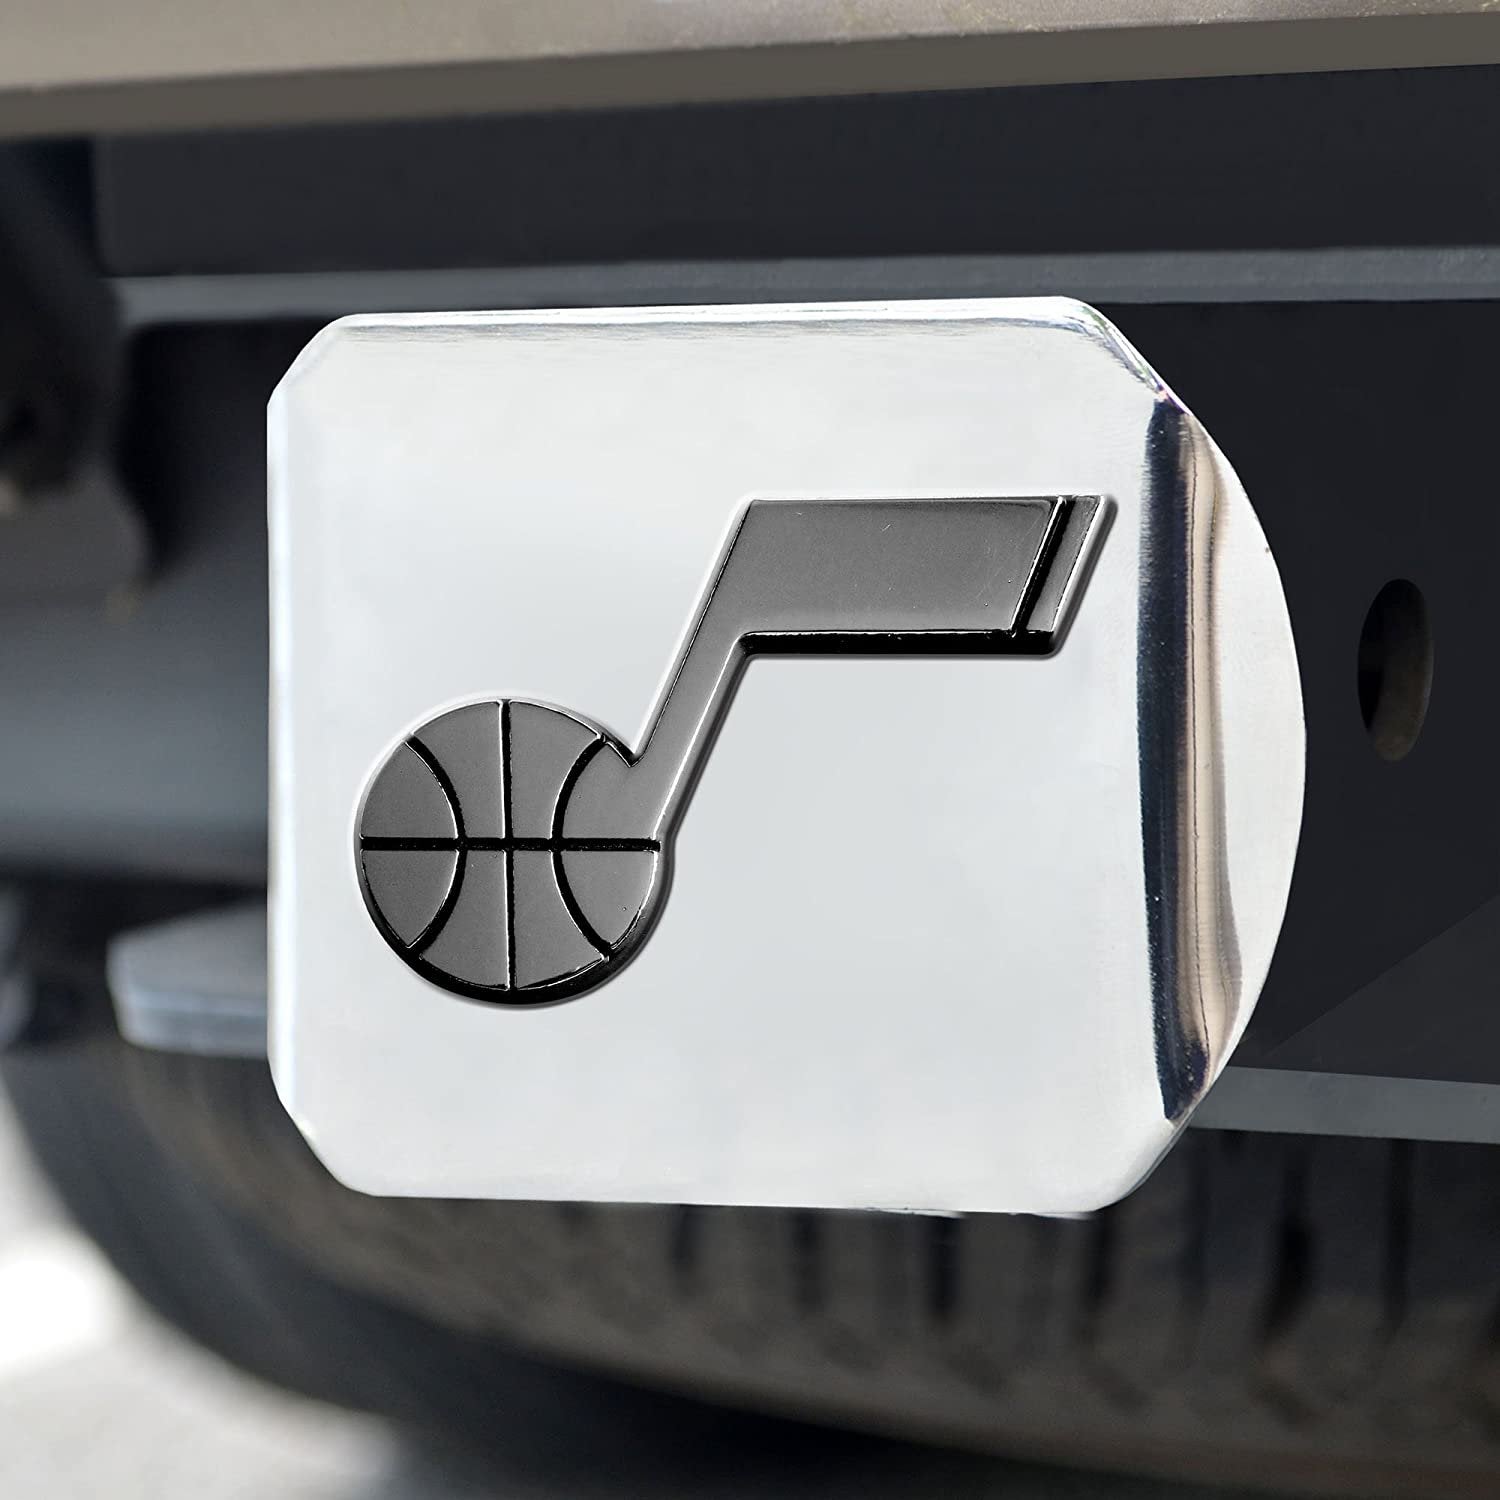 Utah Jazz Hitch Cover Solid Metal with Raised Chrome Metal Emblem 2" Square Type III